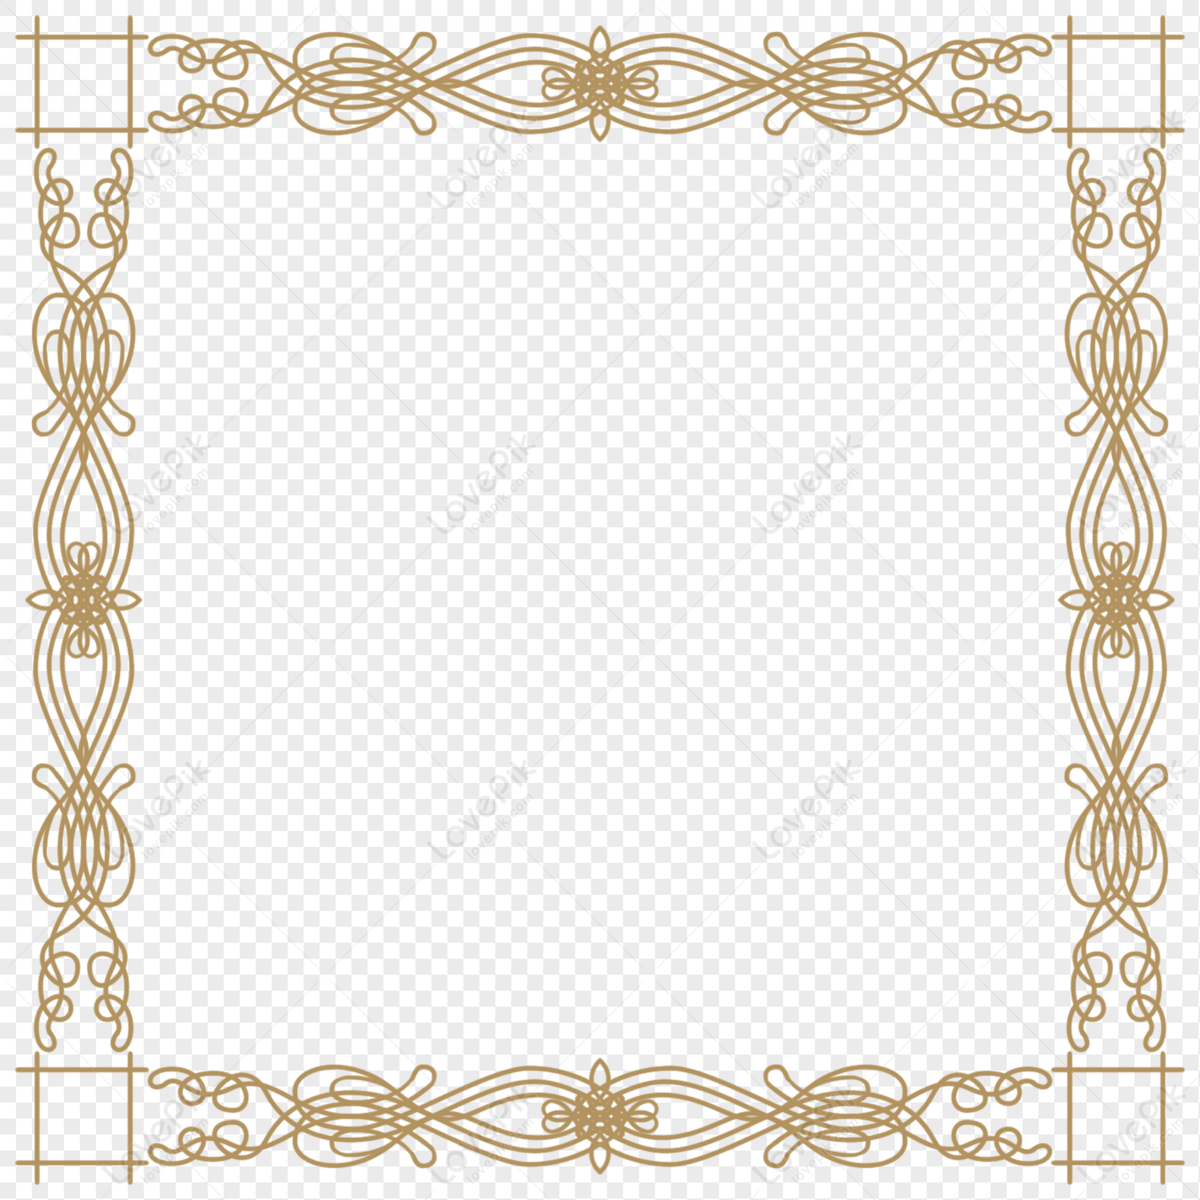 European Classic Golden Border PNG Transparent Background And Clipart Image  For Free Download - Lovepik | 401369340